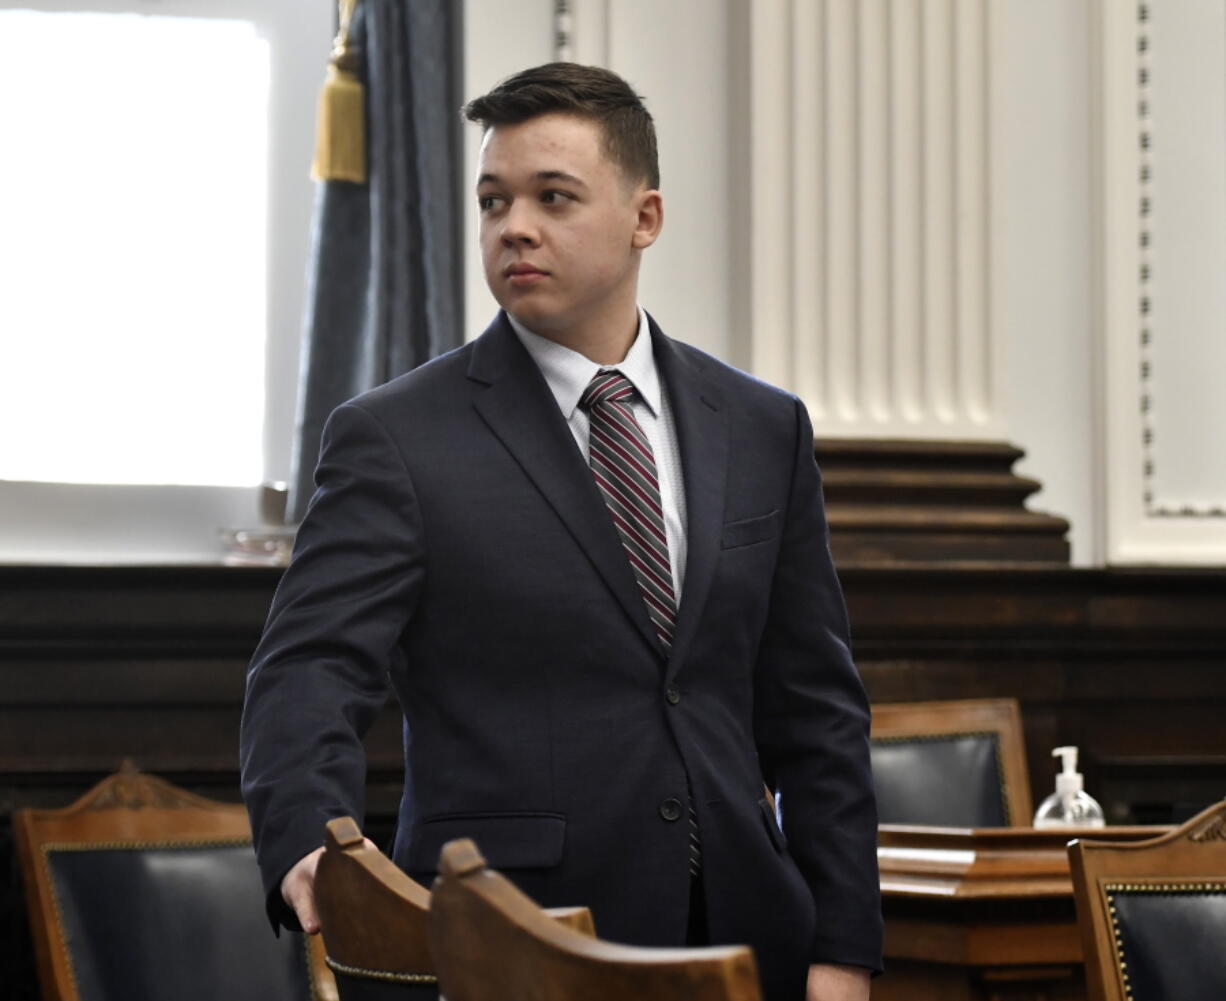 Kyle Rittenhouse looks back to the gallery during a break in testimony from Gage Groskreutz during his trial at the Kenosha County Courthouse in Kenosha, Wis., on Monday, Nov. 8, 2021.